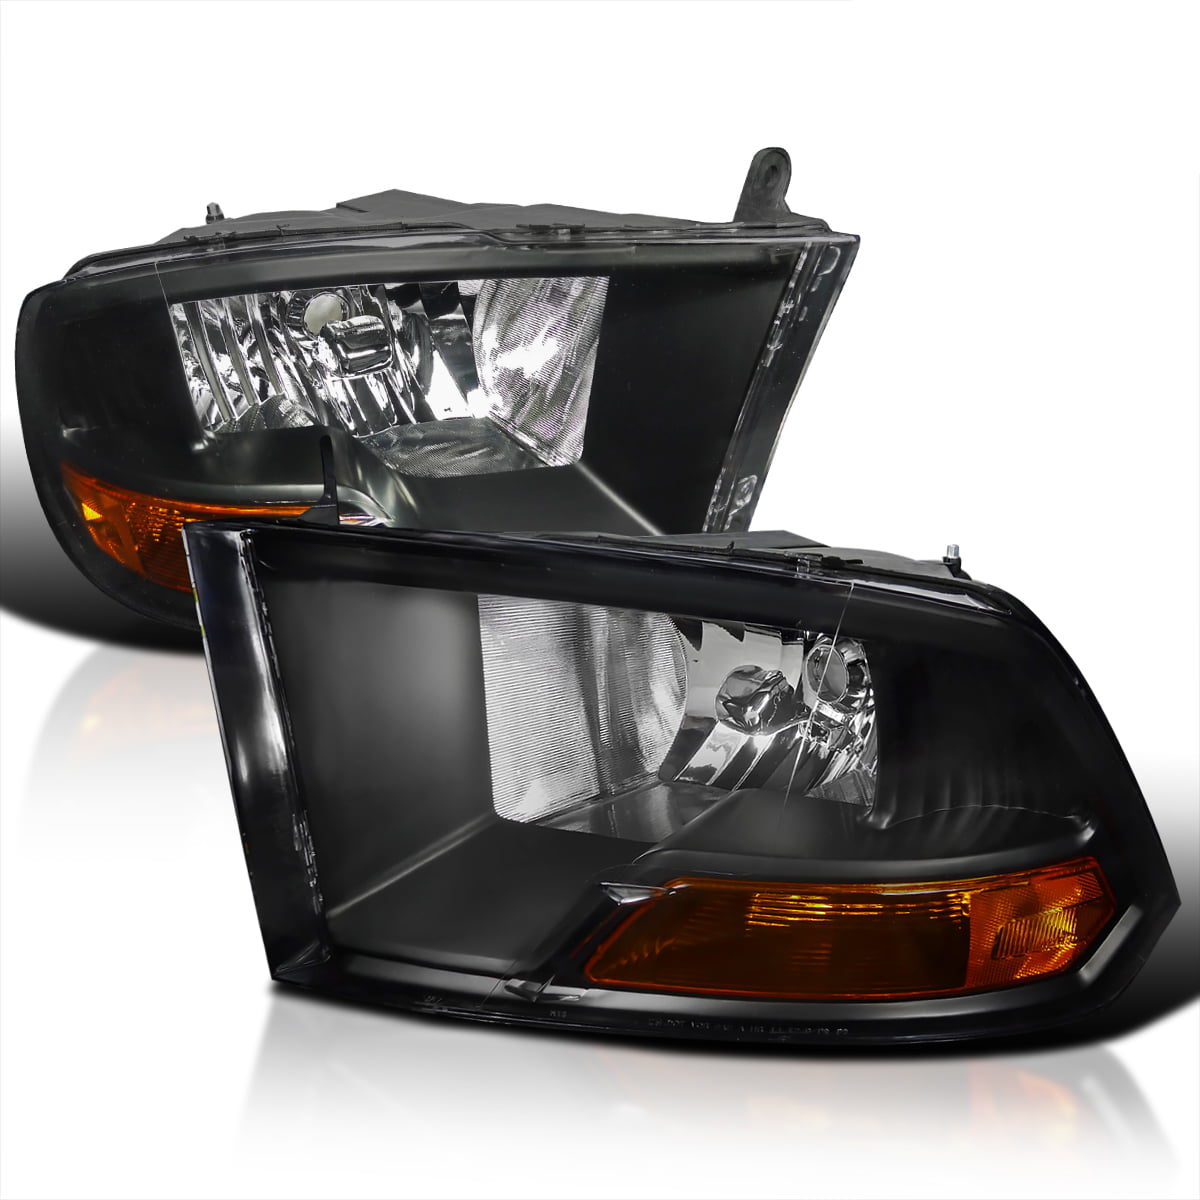 FOR 2009-2018 Dodge Ram Replacement Headlight Set Black/Clear/Amber W/wiring